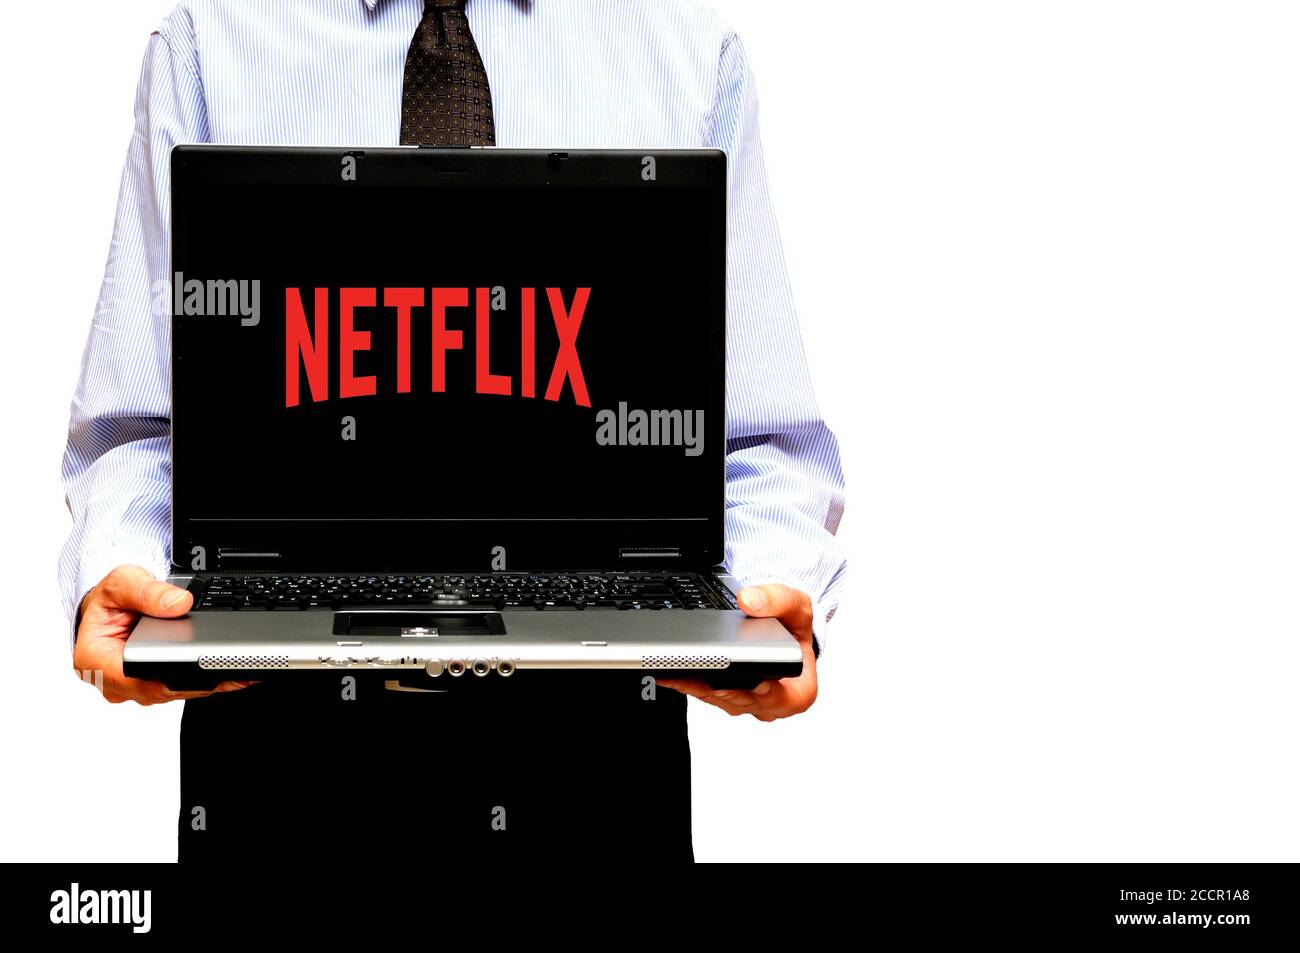 man holding a laptop with a logo of Netflix streaming service on the screen Stock Photo